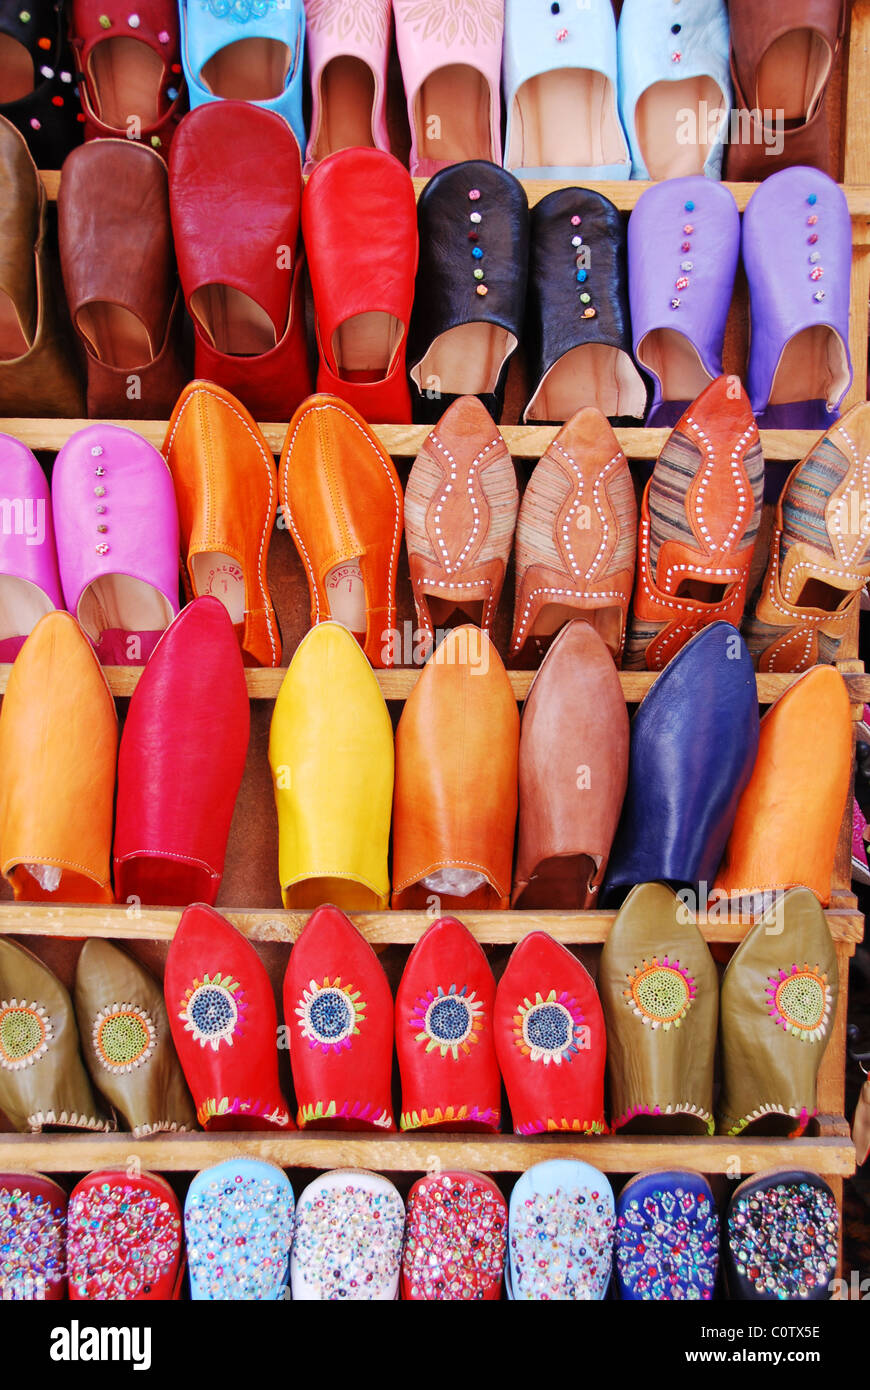 Moroccan slippers. Stock Photo